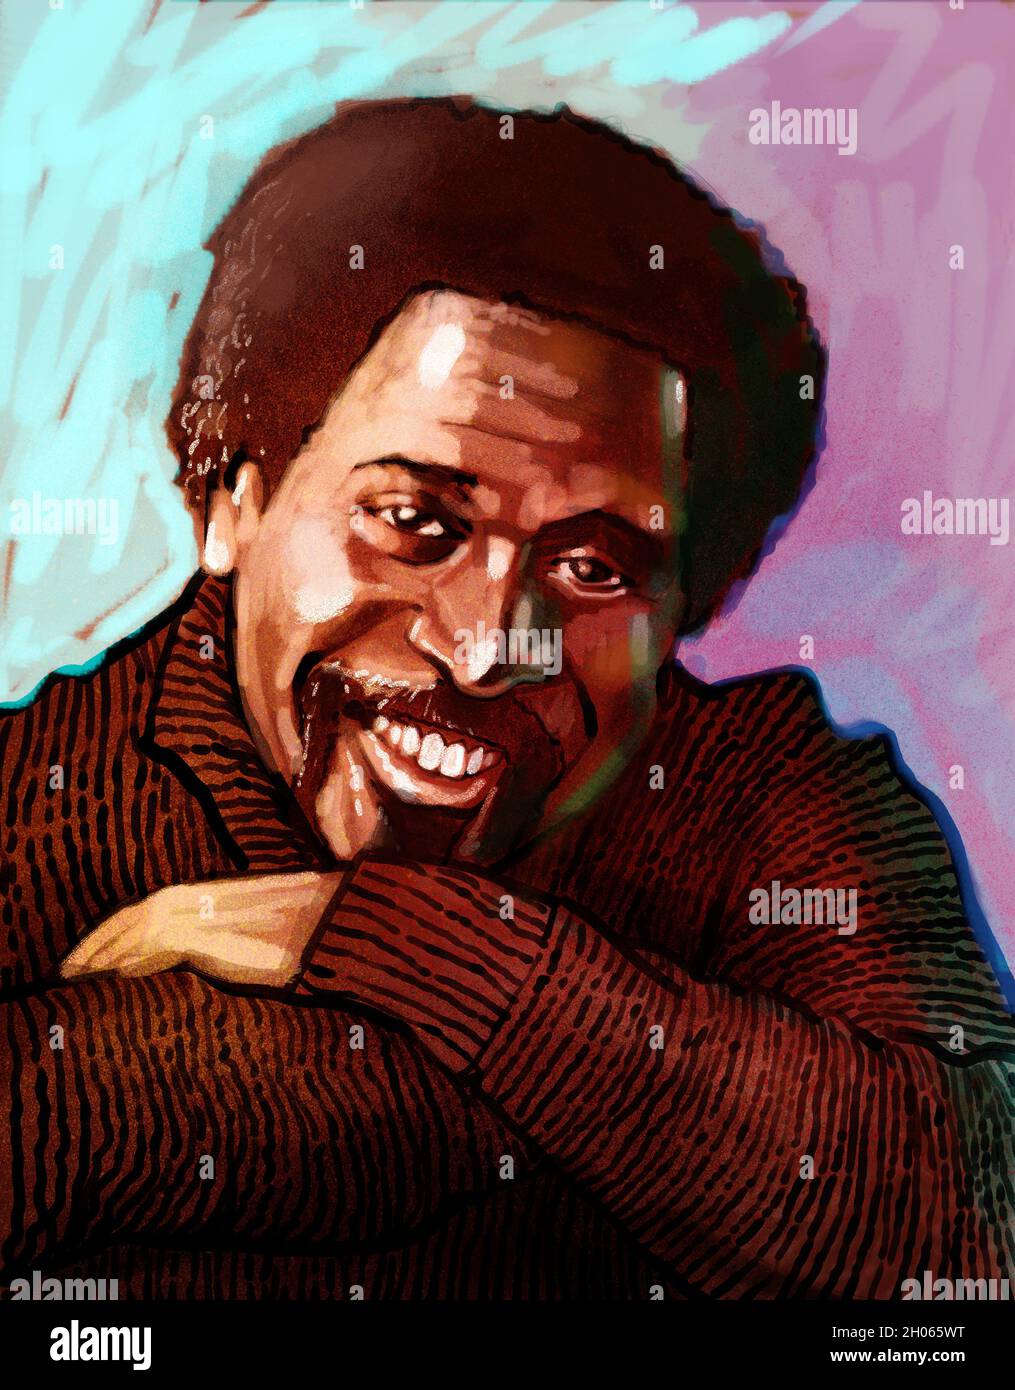 Portraits of music composer Charlie Smalls An African-American composer and songwriter best known for writing The Wiz broadway musical jazz music art Stock Photo